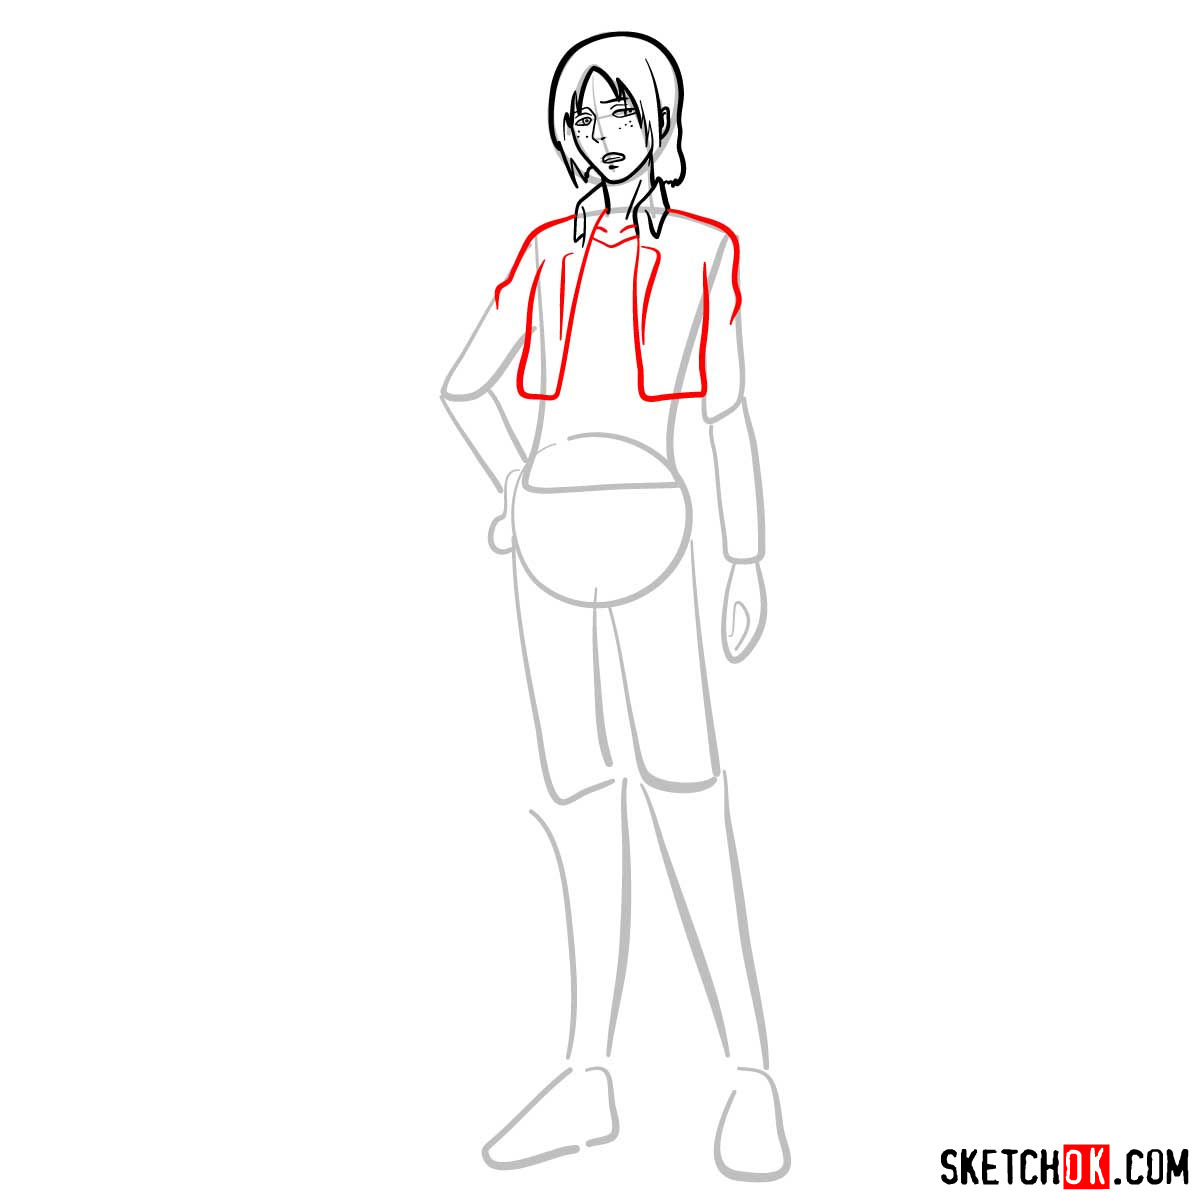 How to draw Ymir from Attack on Titan - step 07